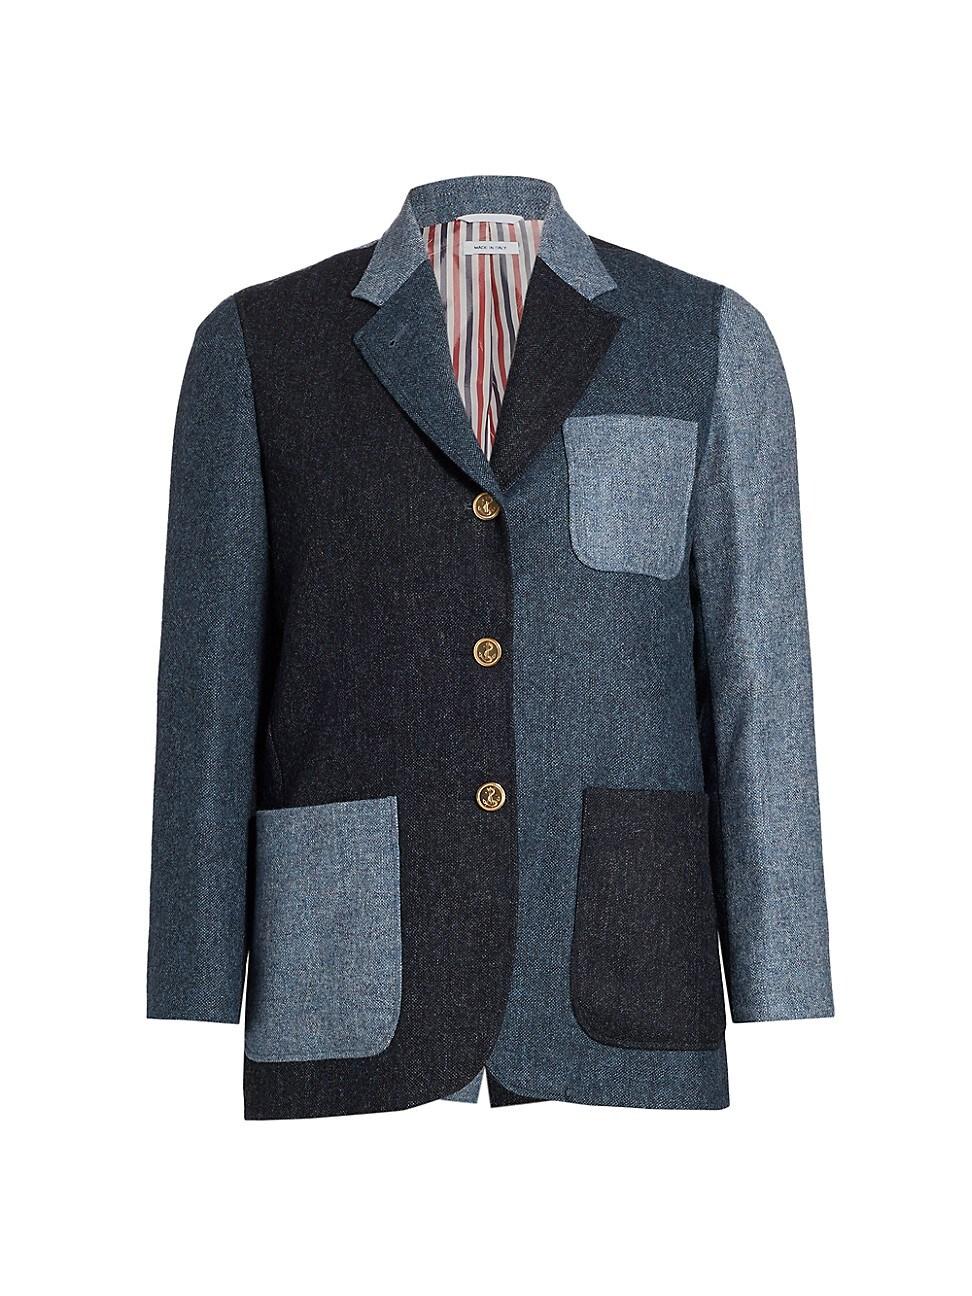 Thom Browne Fit 2 Wool Funmix Donegal Tweed Sportcoat in Blue | Lyst